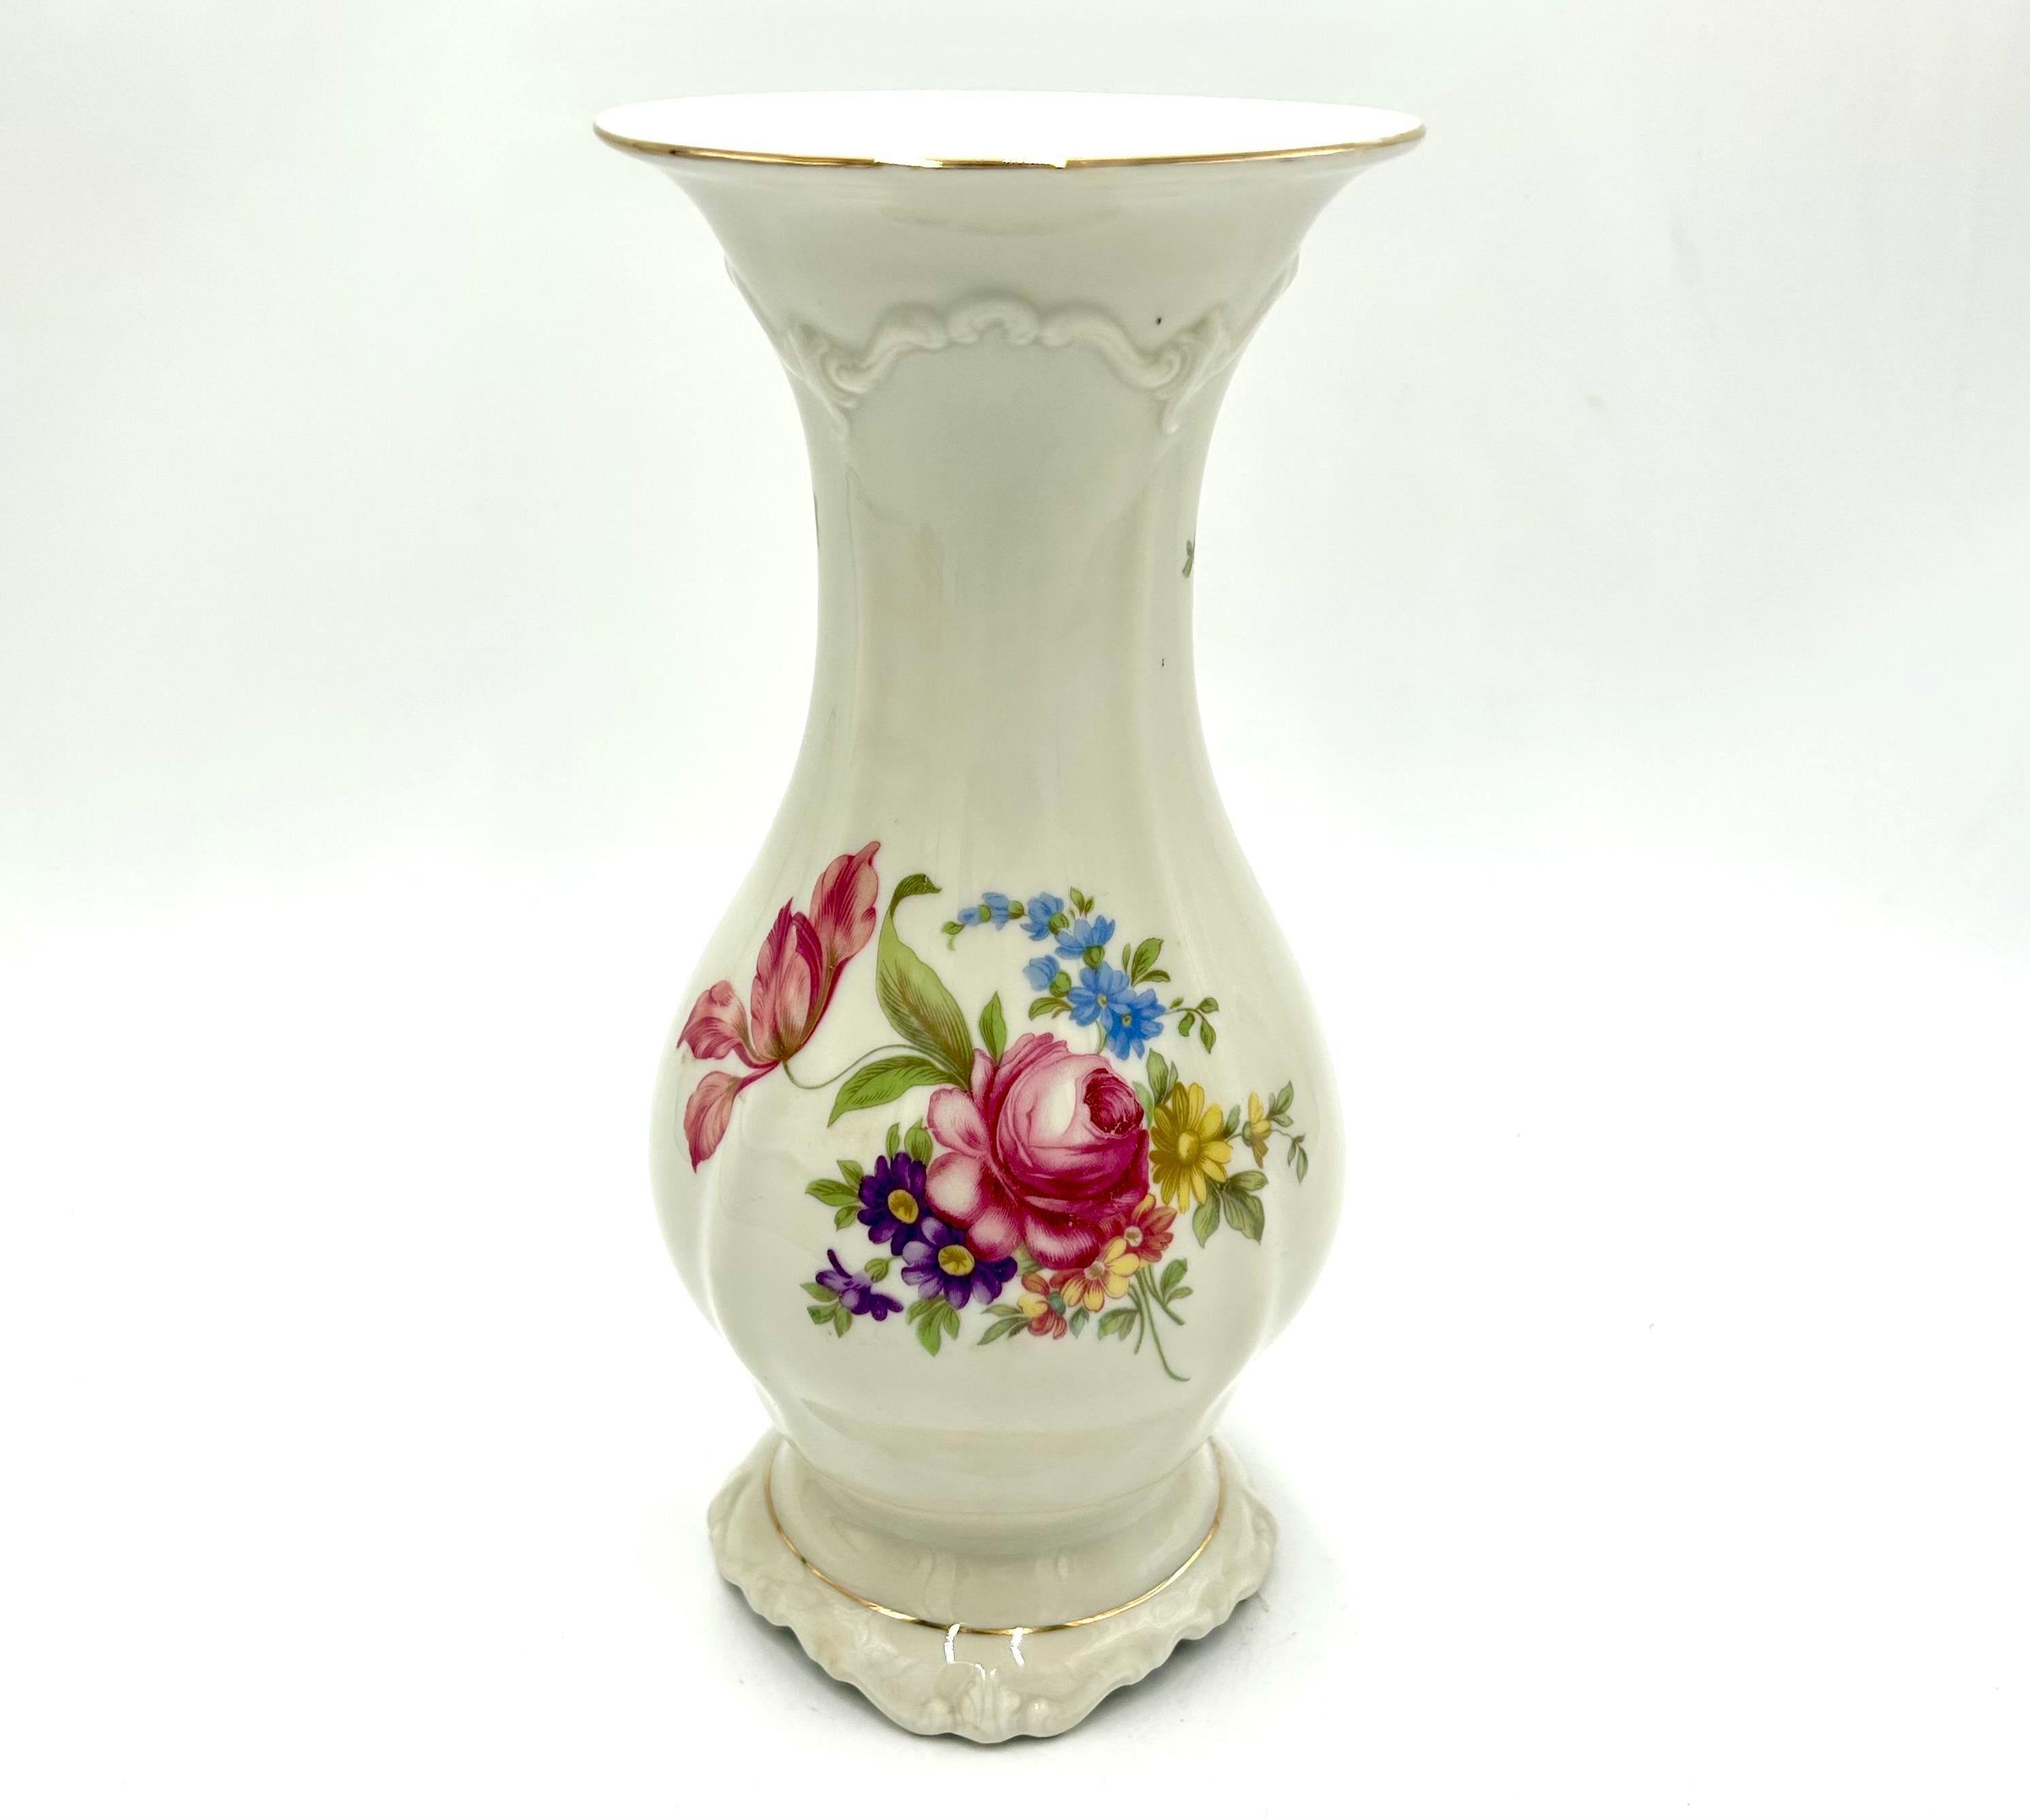 Porcelain vase made of ecru porcelain, decorated with gilding and a bouquet of flowers. Made in Germany by the renowned Rosenthal label, Pompadour series. Marked with the mark used in 1944. Very good condition, no damage.
Measures: Height: